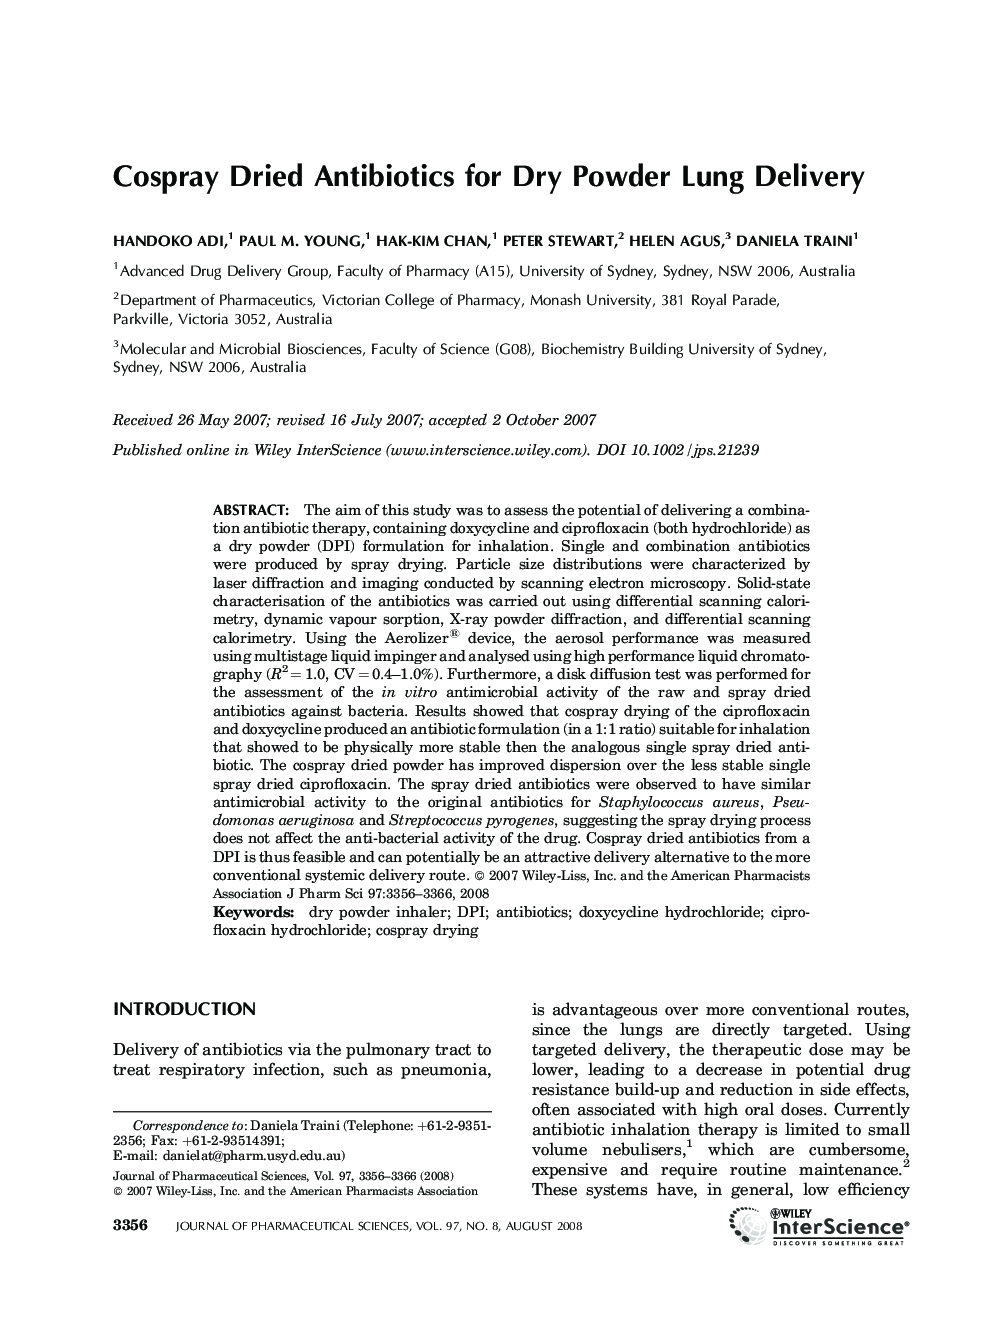 Cospray Dried Antibiotics for Dry Powder Lung Delivery